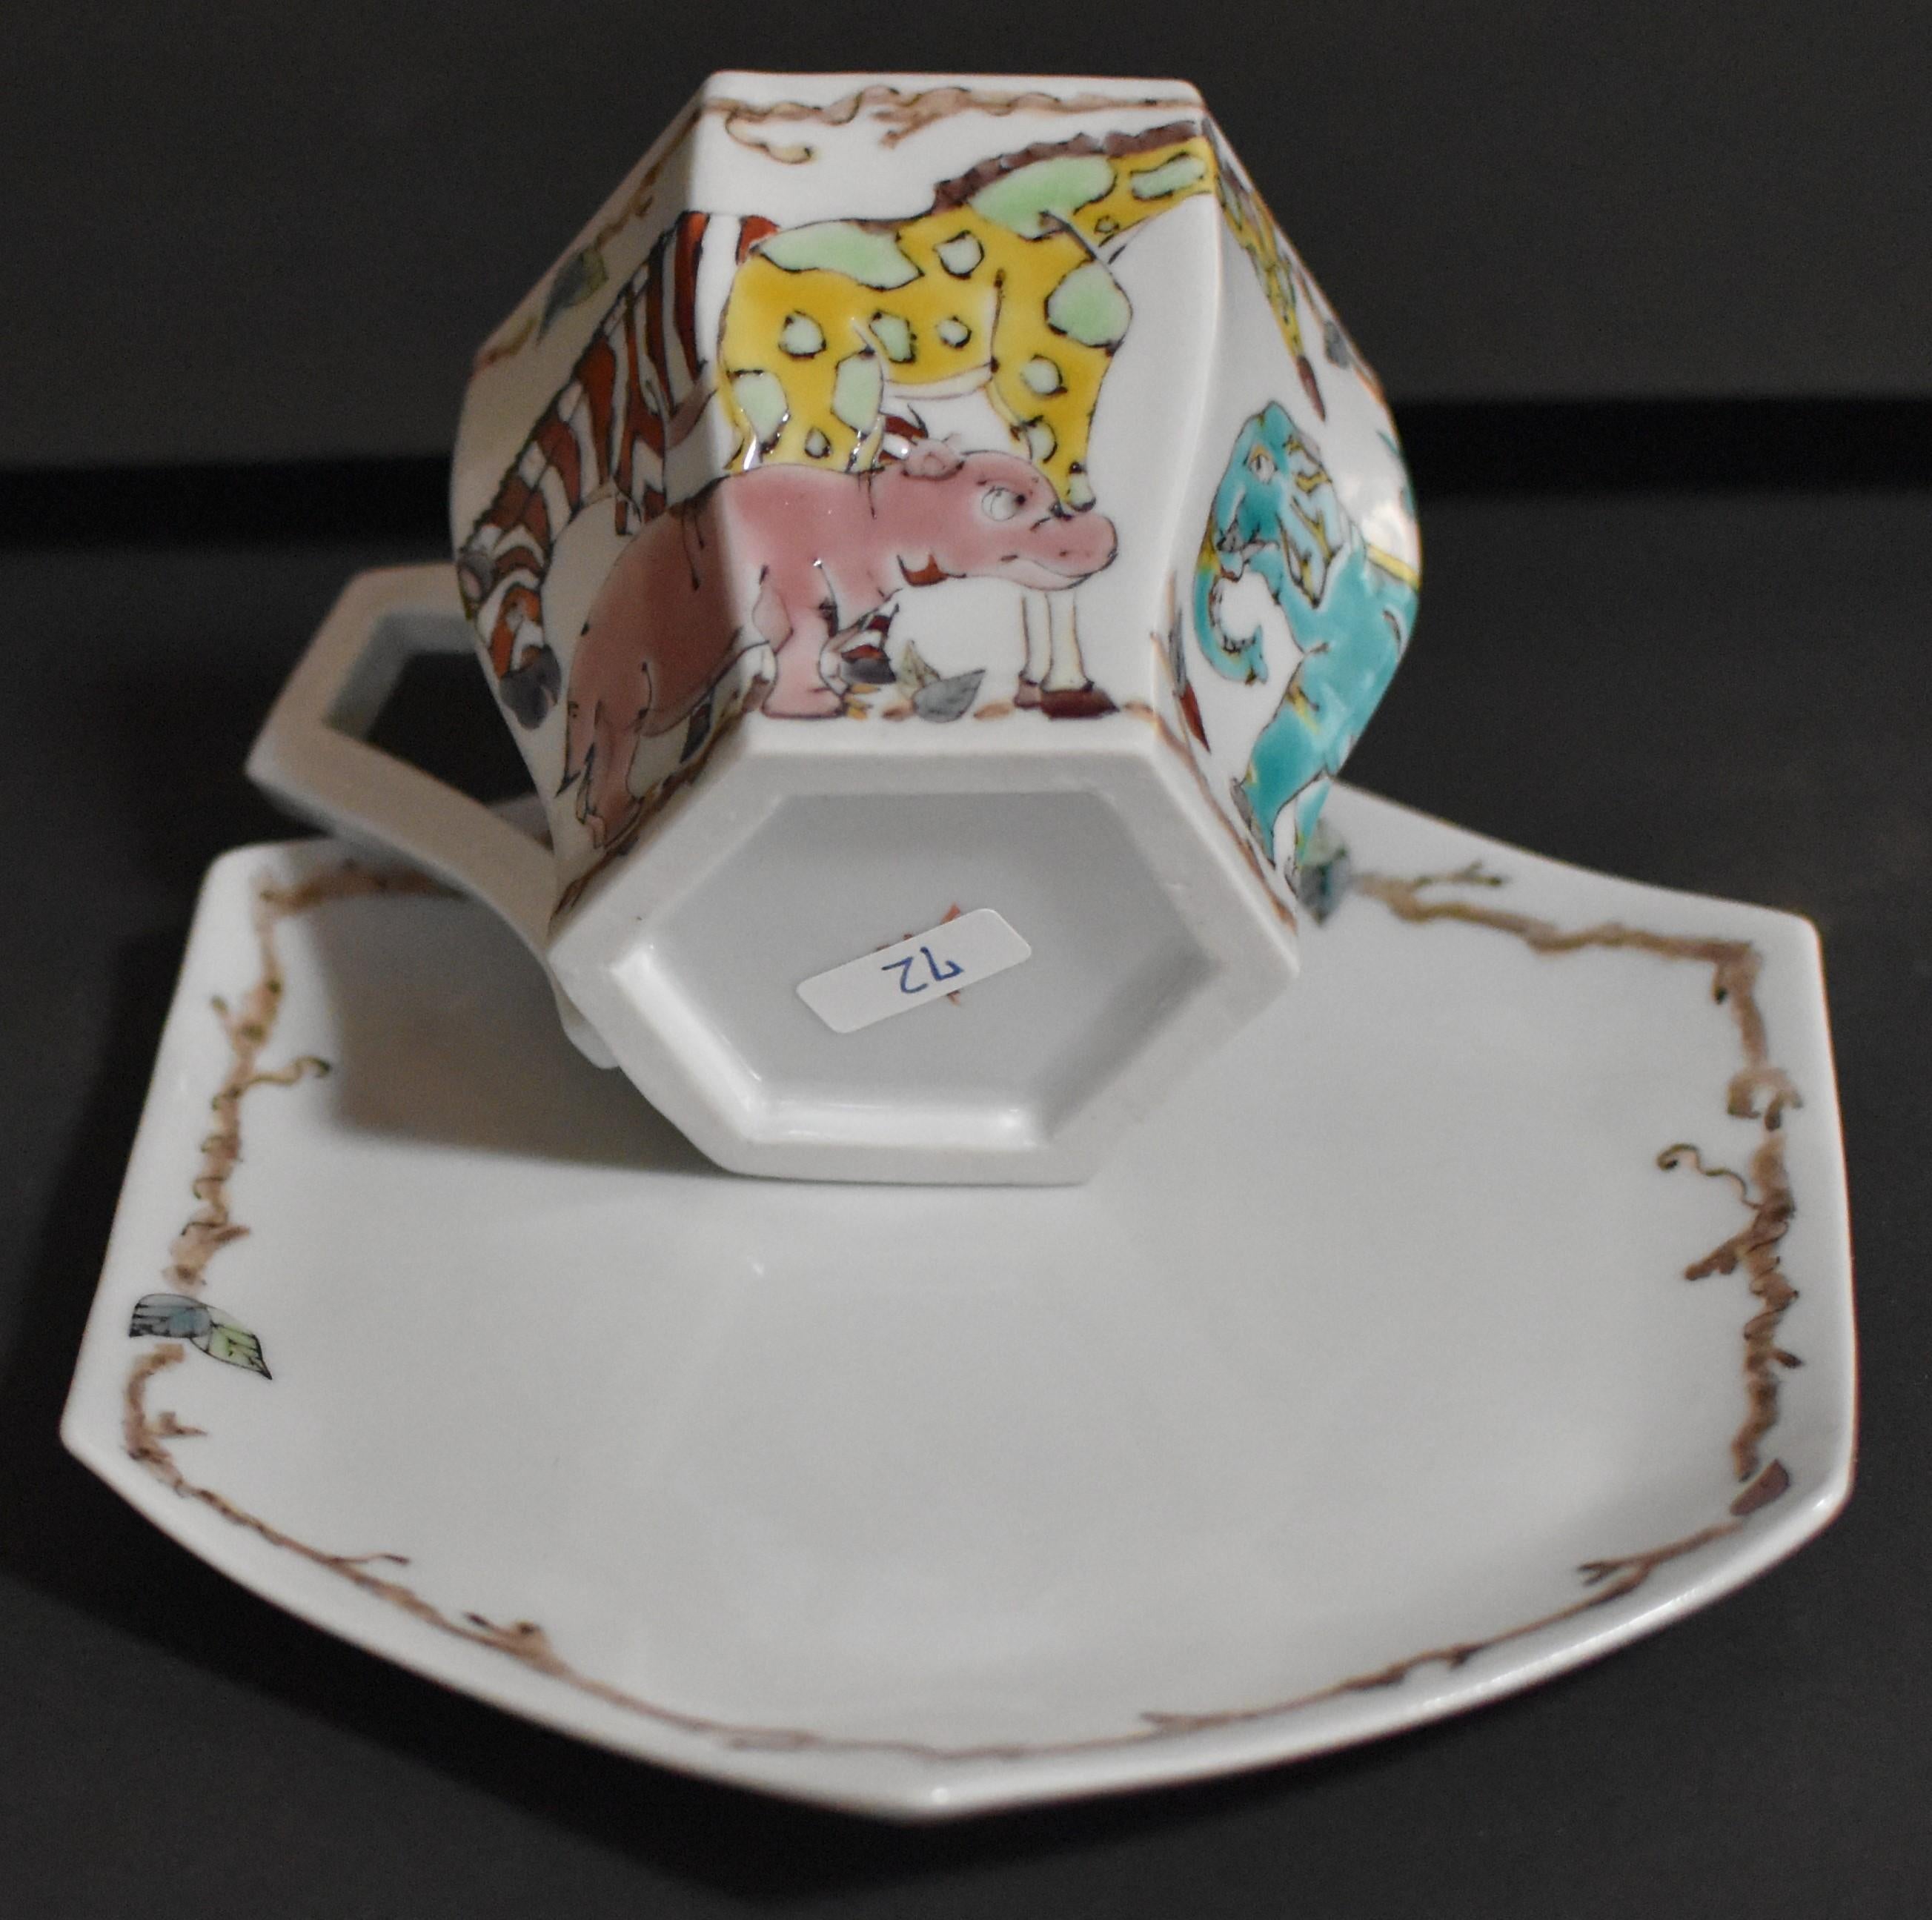 Contemporary Japanese handcrafted, hand painted cup and saucer in a unique hexagonal shape, with a unique interpretation of elephants and other animals.
Having started his career in the venerable tradition of old Kutani porcelain, the artist